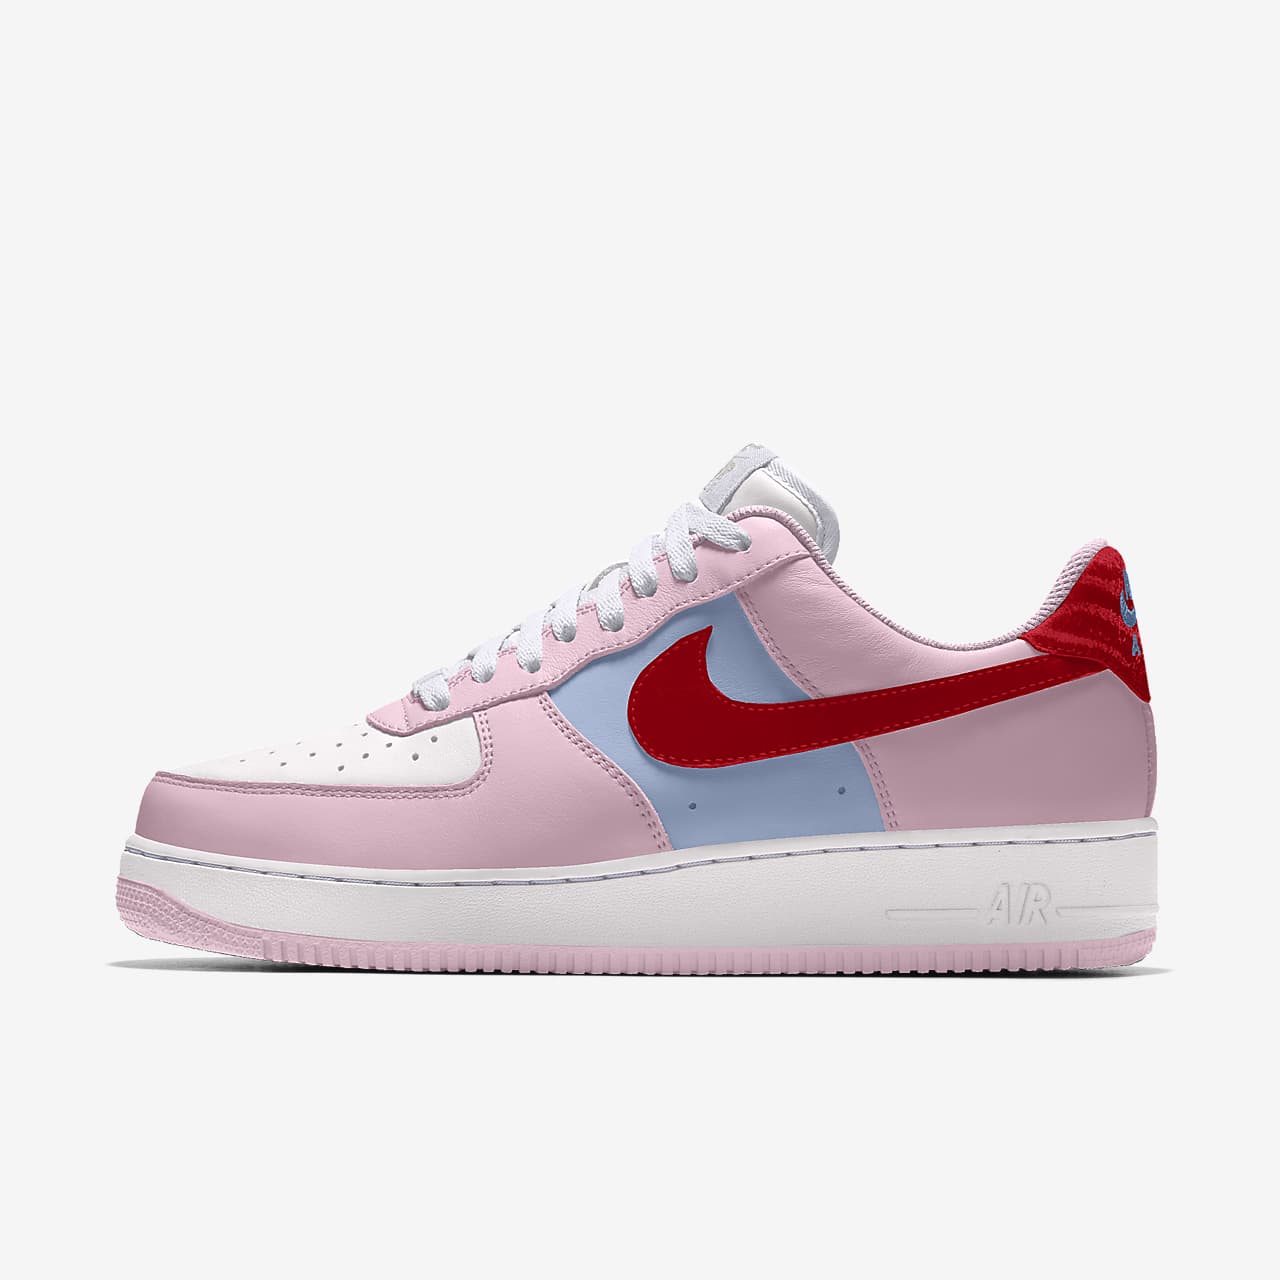 Nike Air Force 1 Low By Custom Shoes.